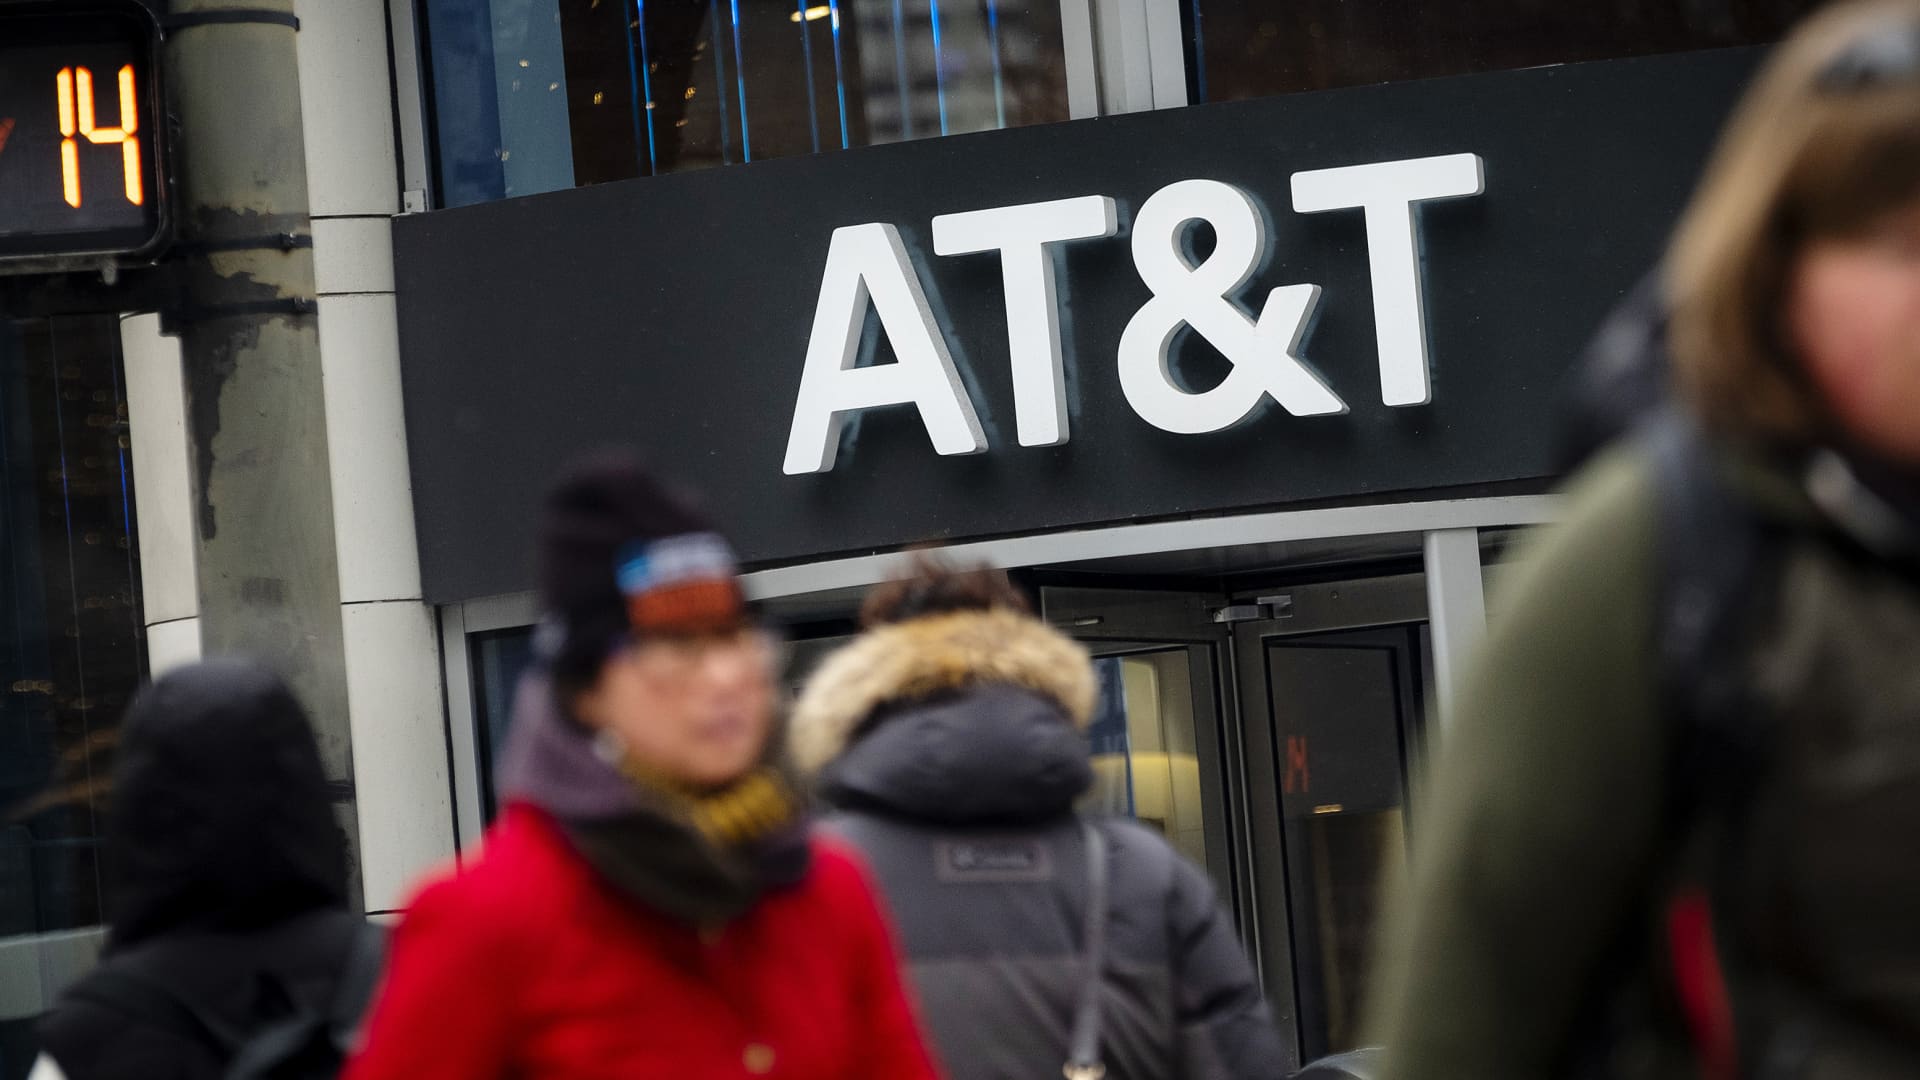 AT&T Illinois to pay $23 million to settle corruption probe related to bribing former politician